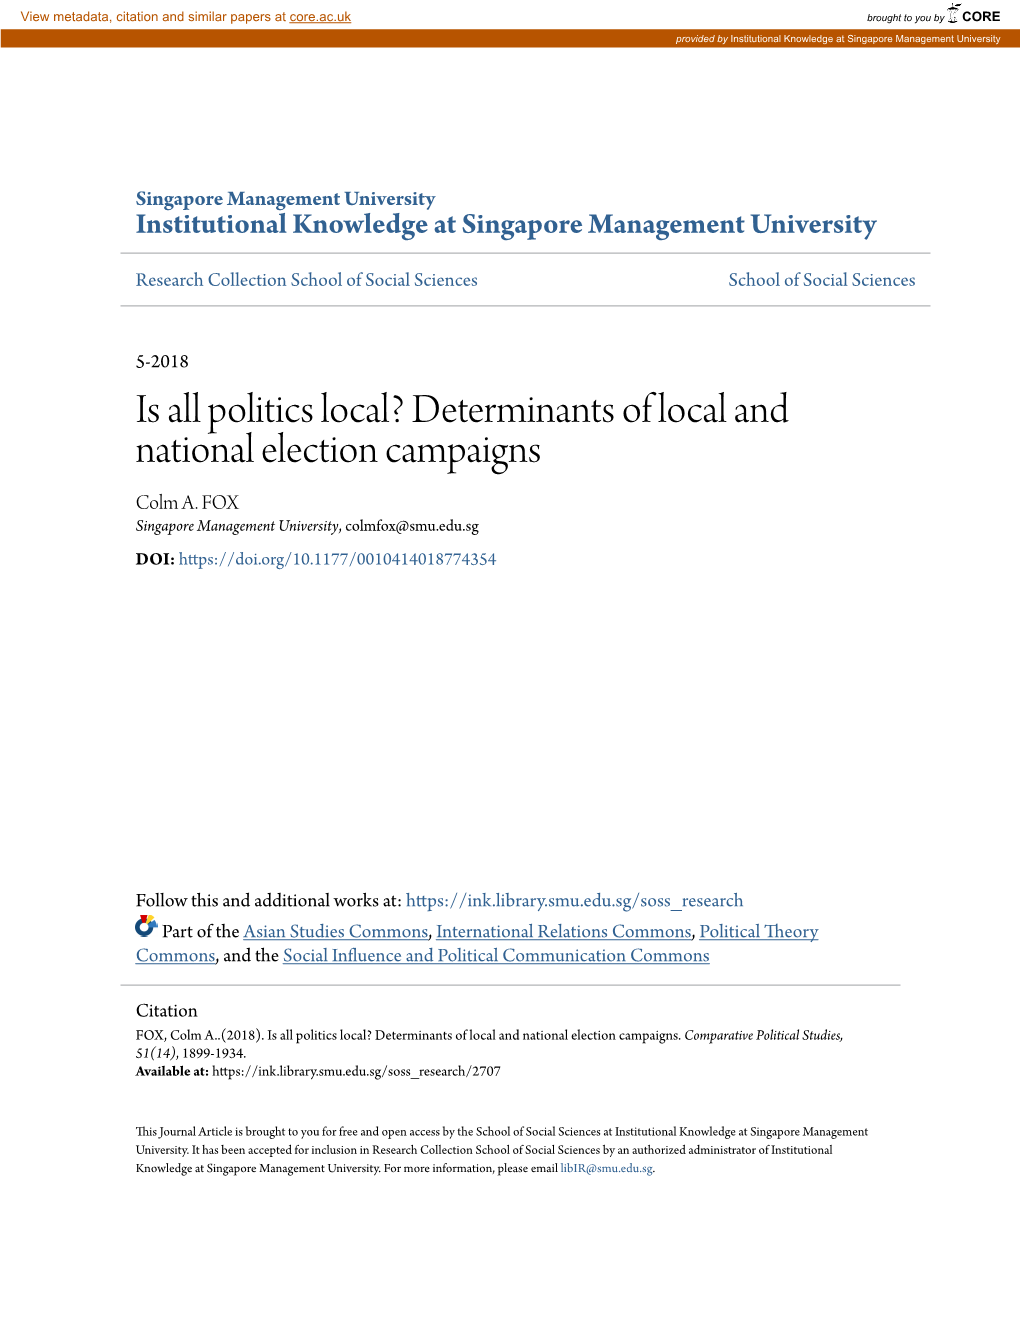 Determinants of Local and National Election Campaigns Colm A